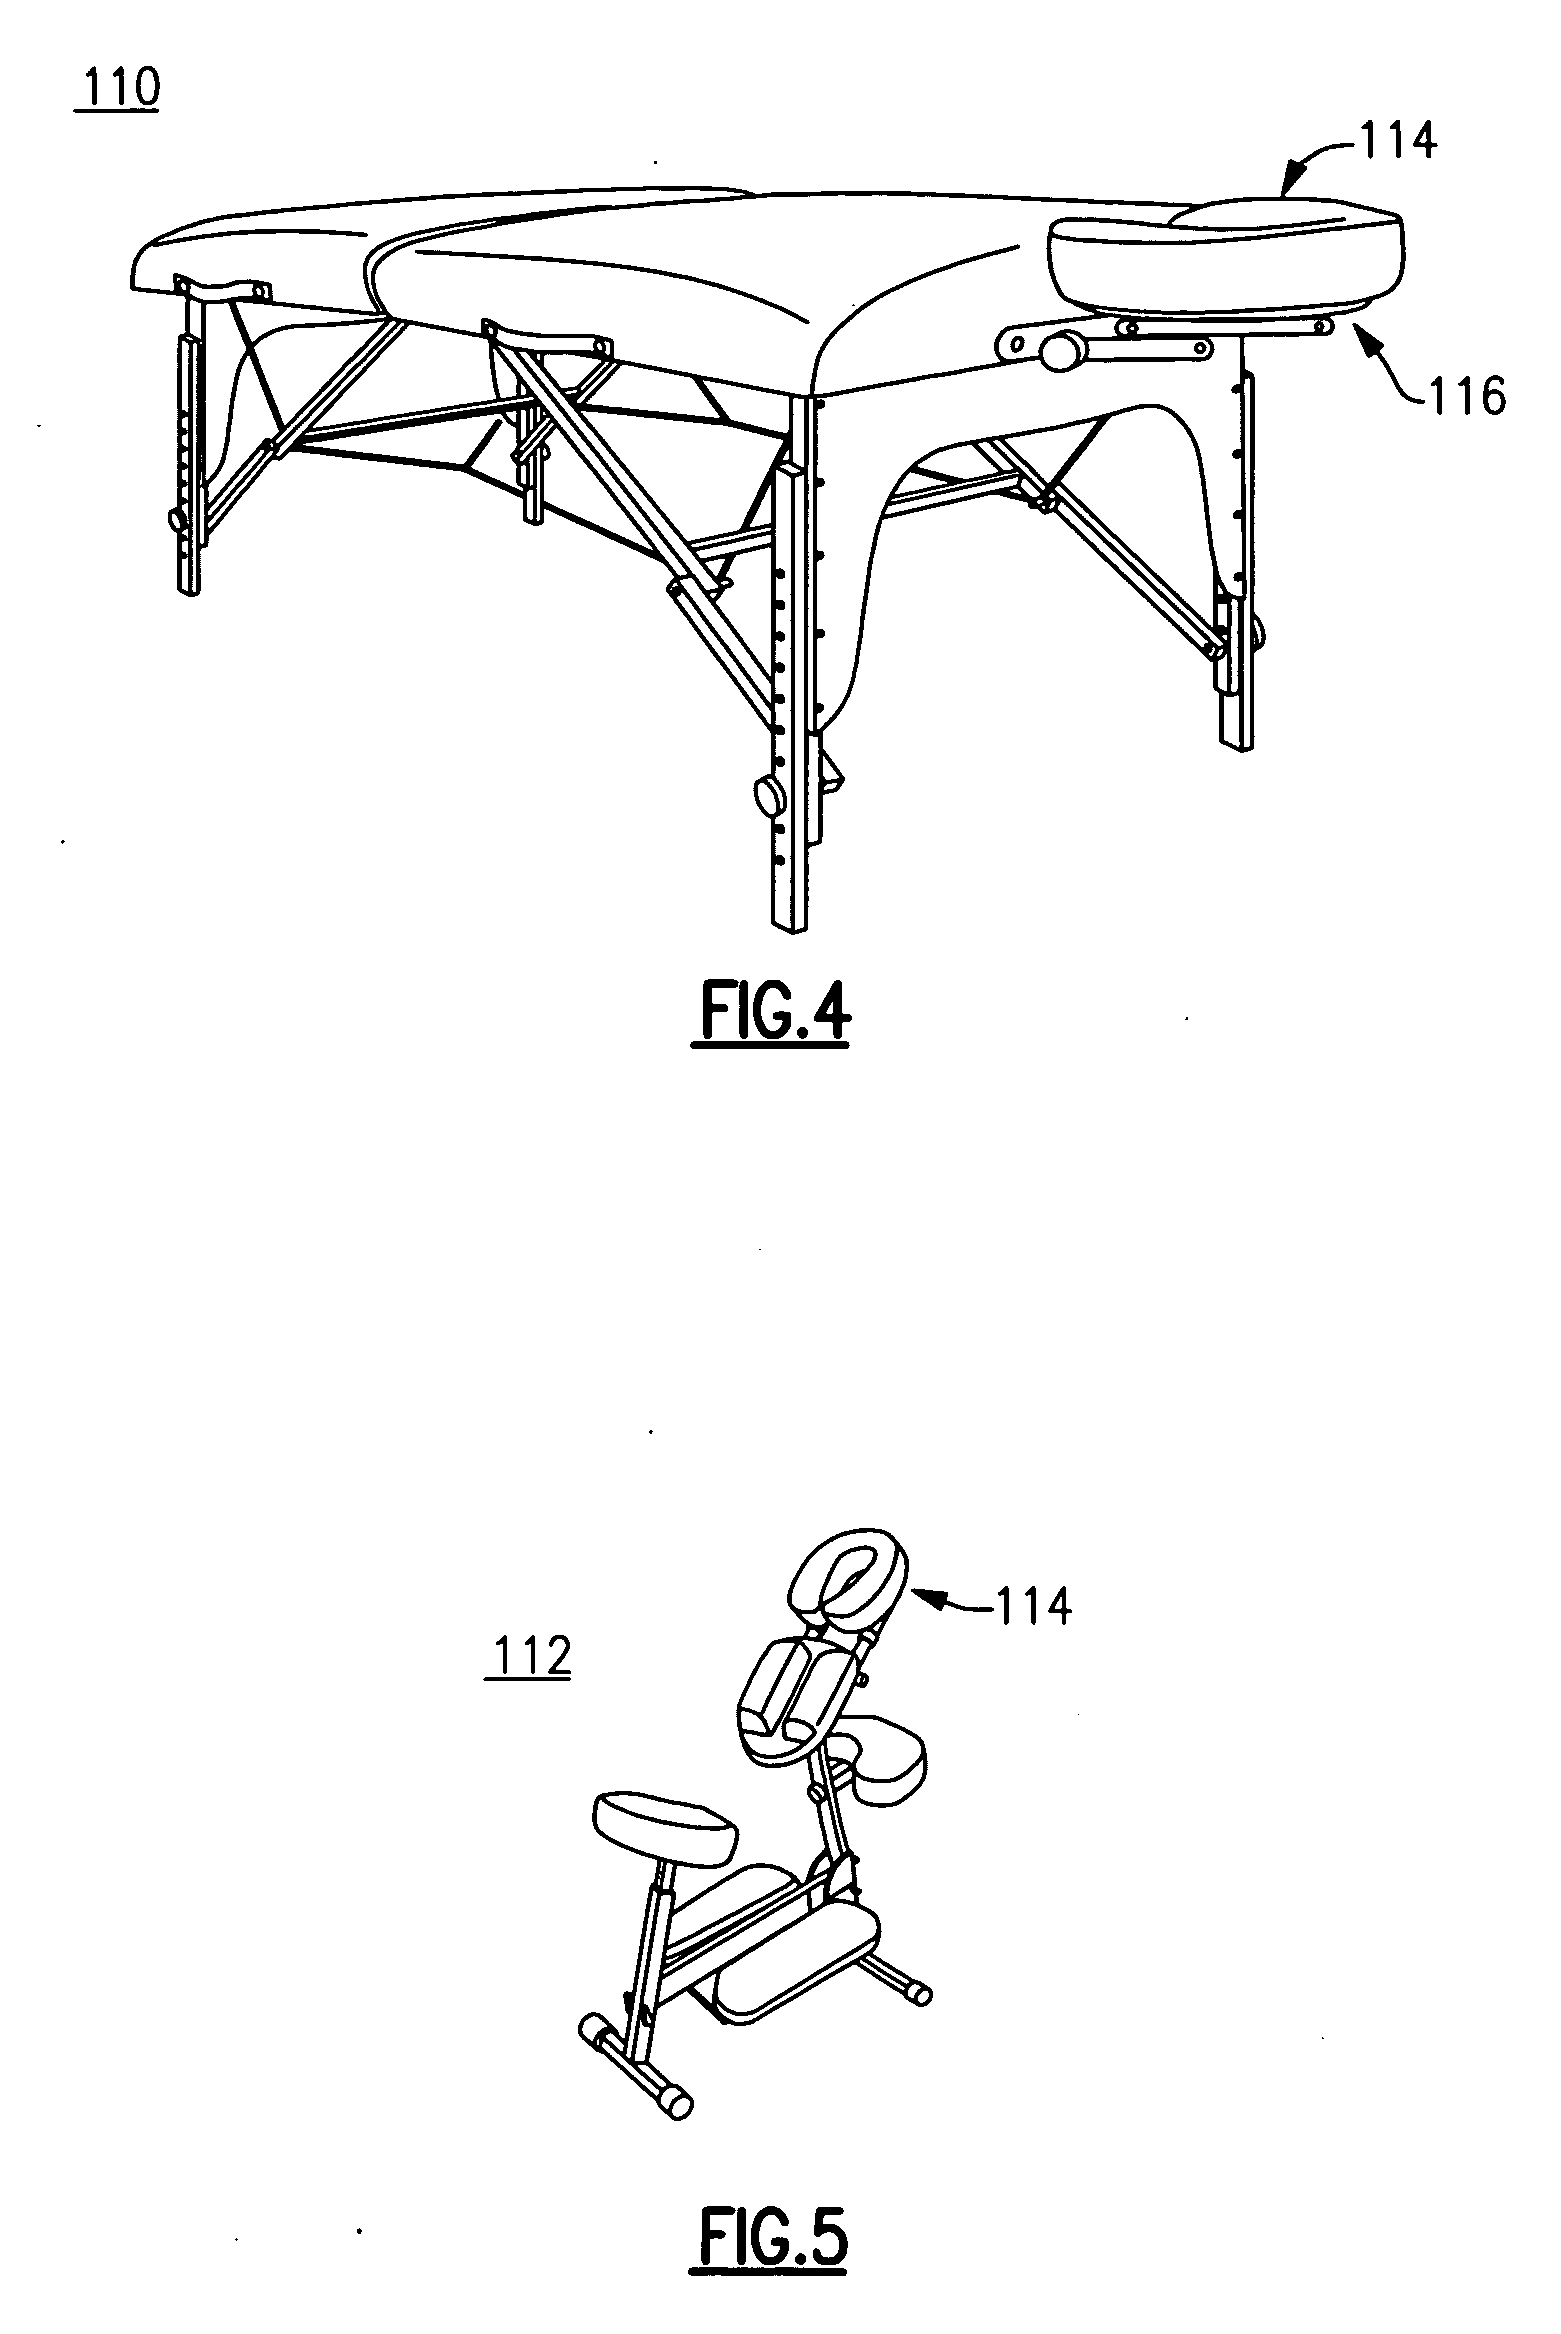 Apparatus for administration of aromatherapy on a massage table or chair